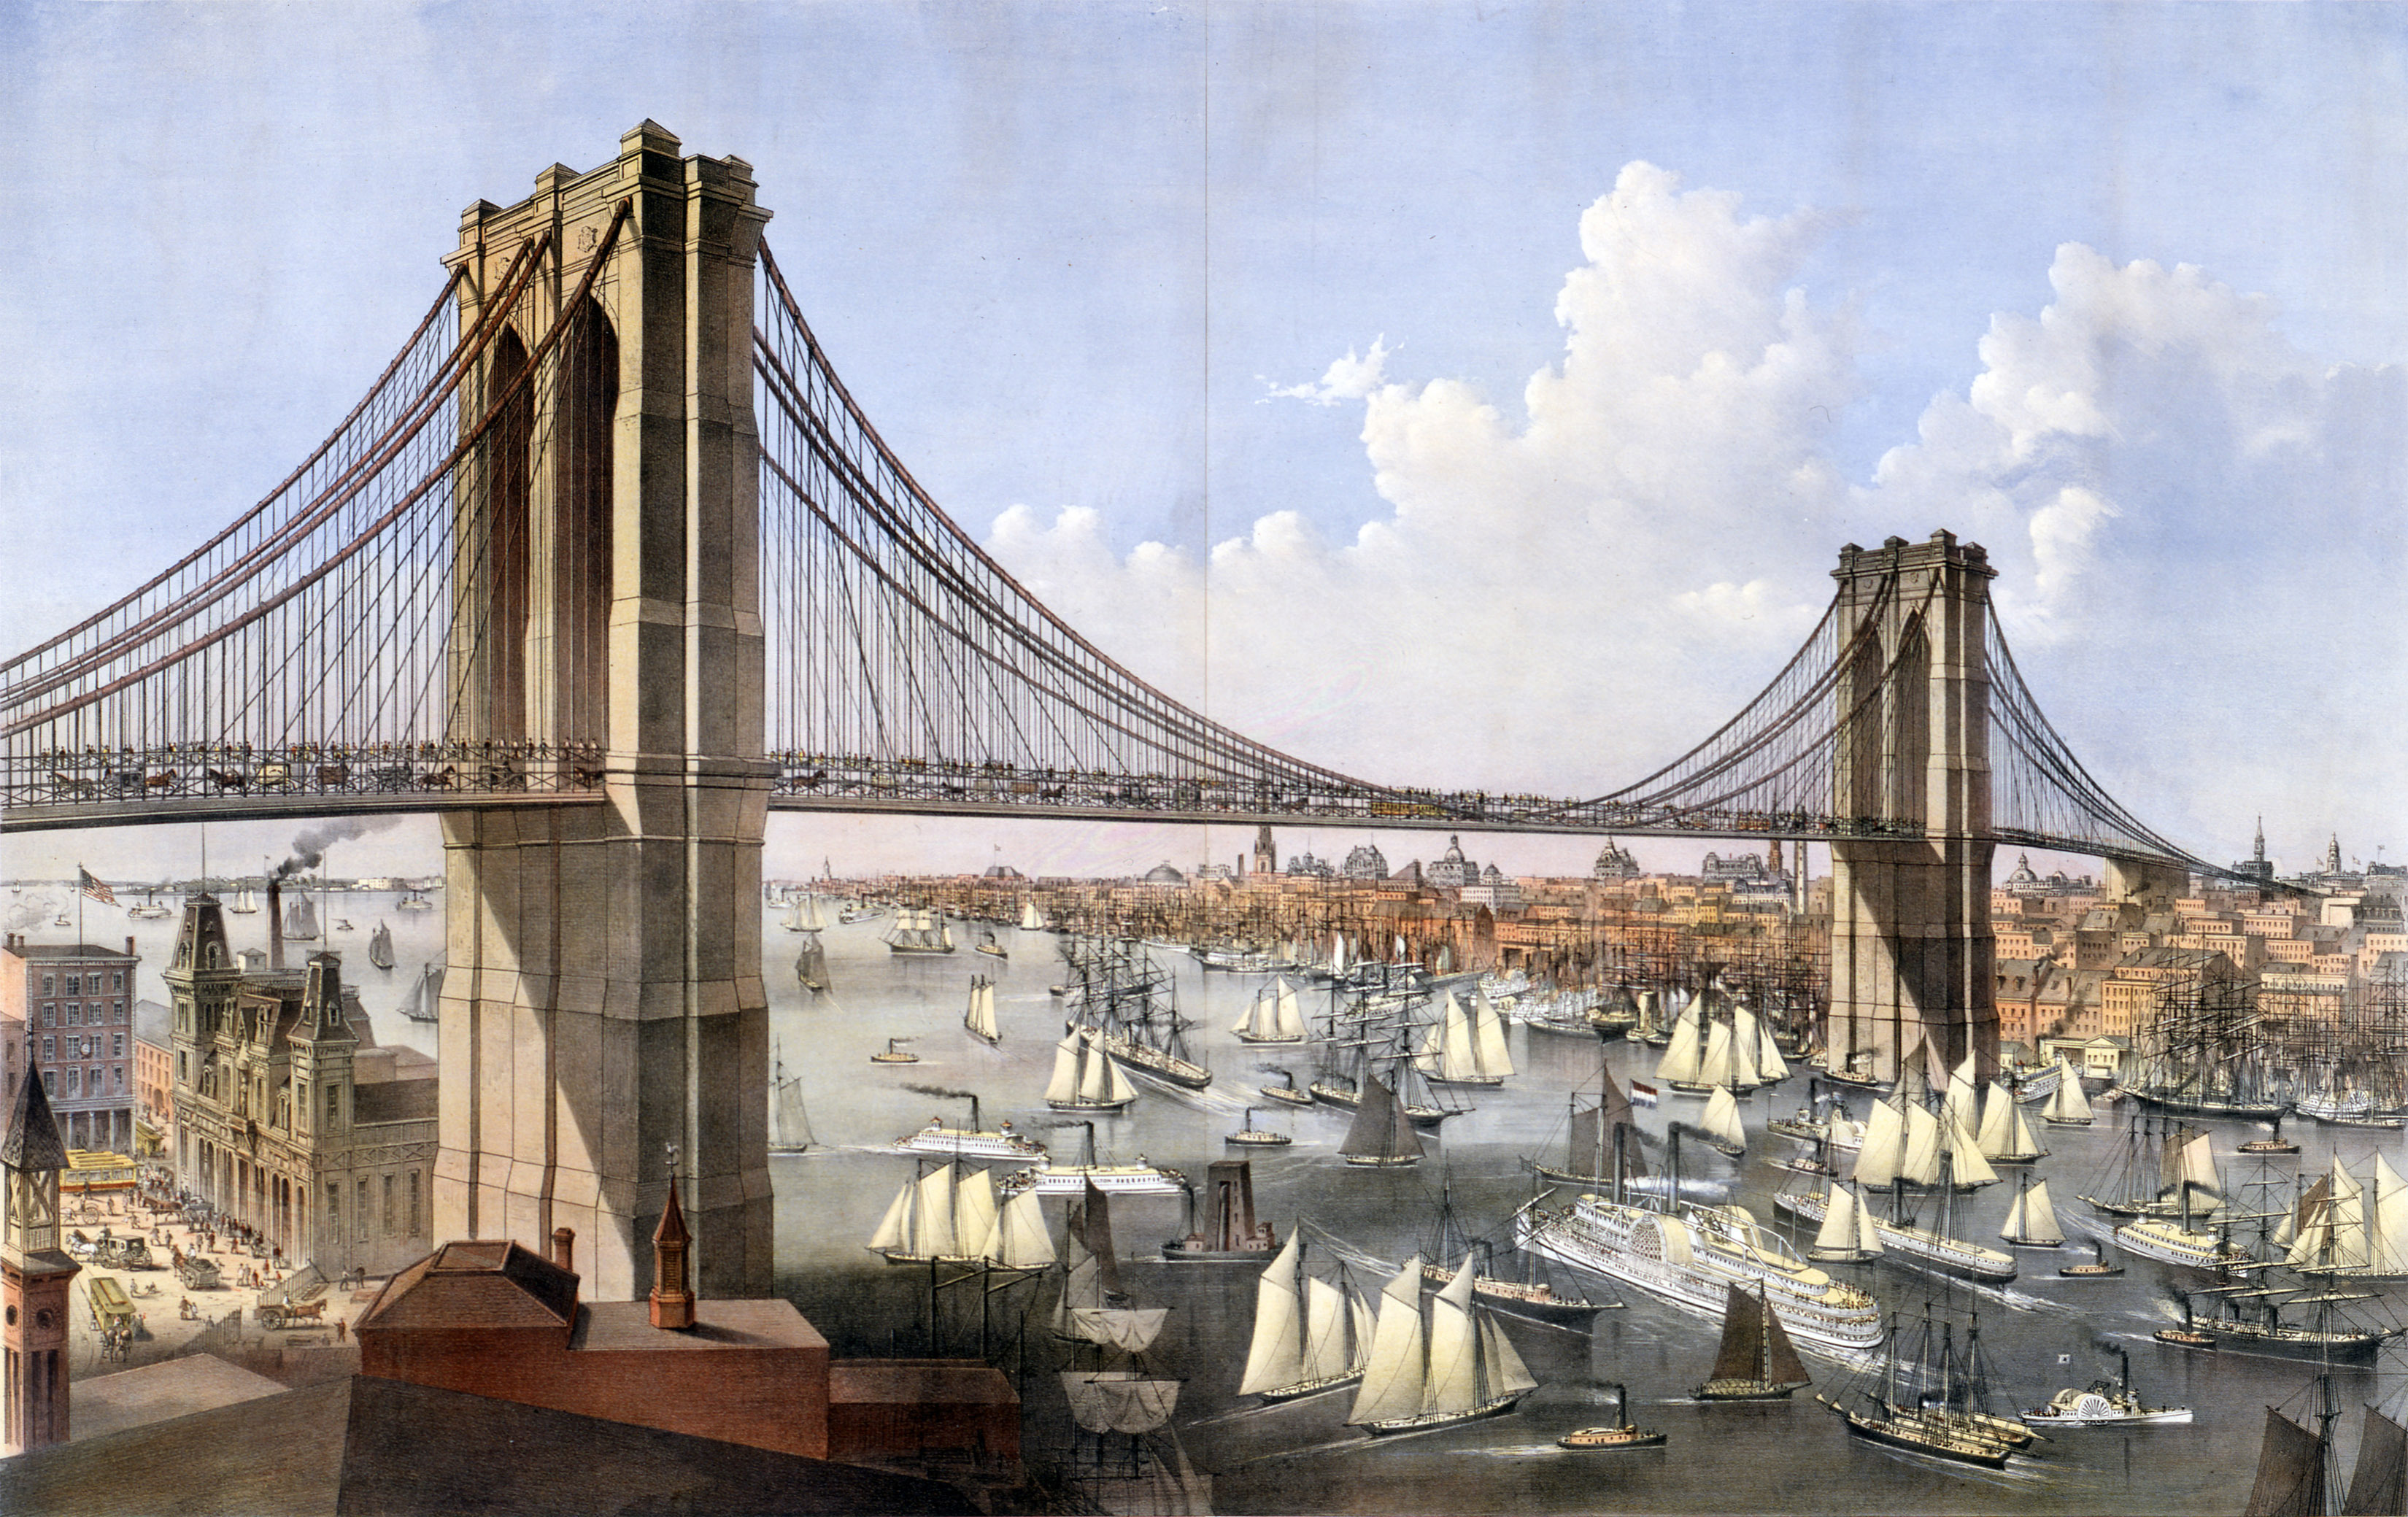 The East River in 1886, from an illustration published by Currier & Ives. Image: Shutterstock